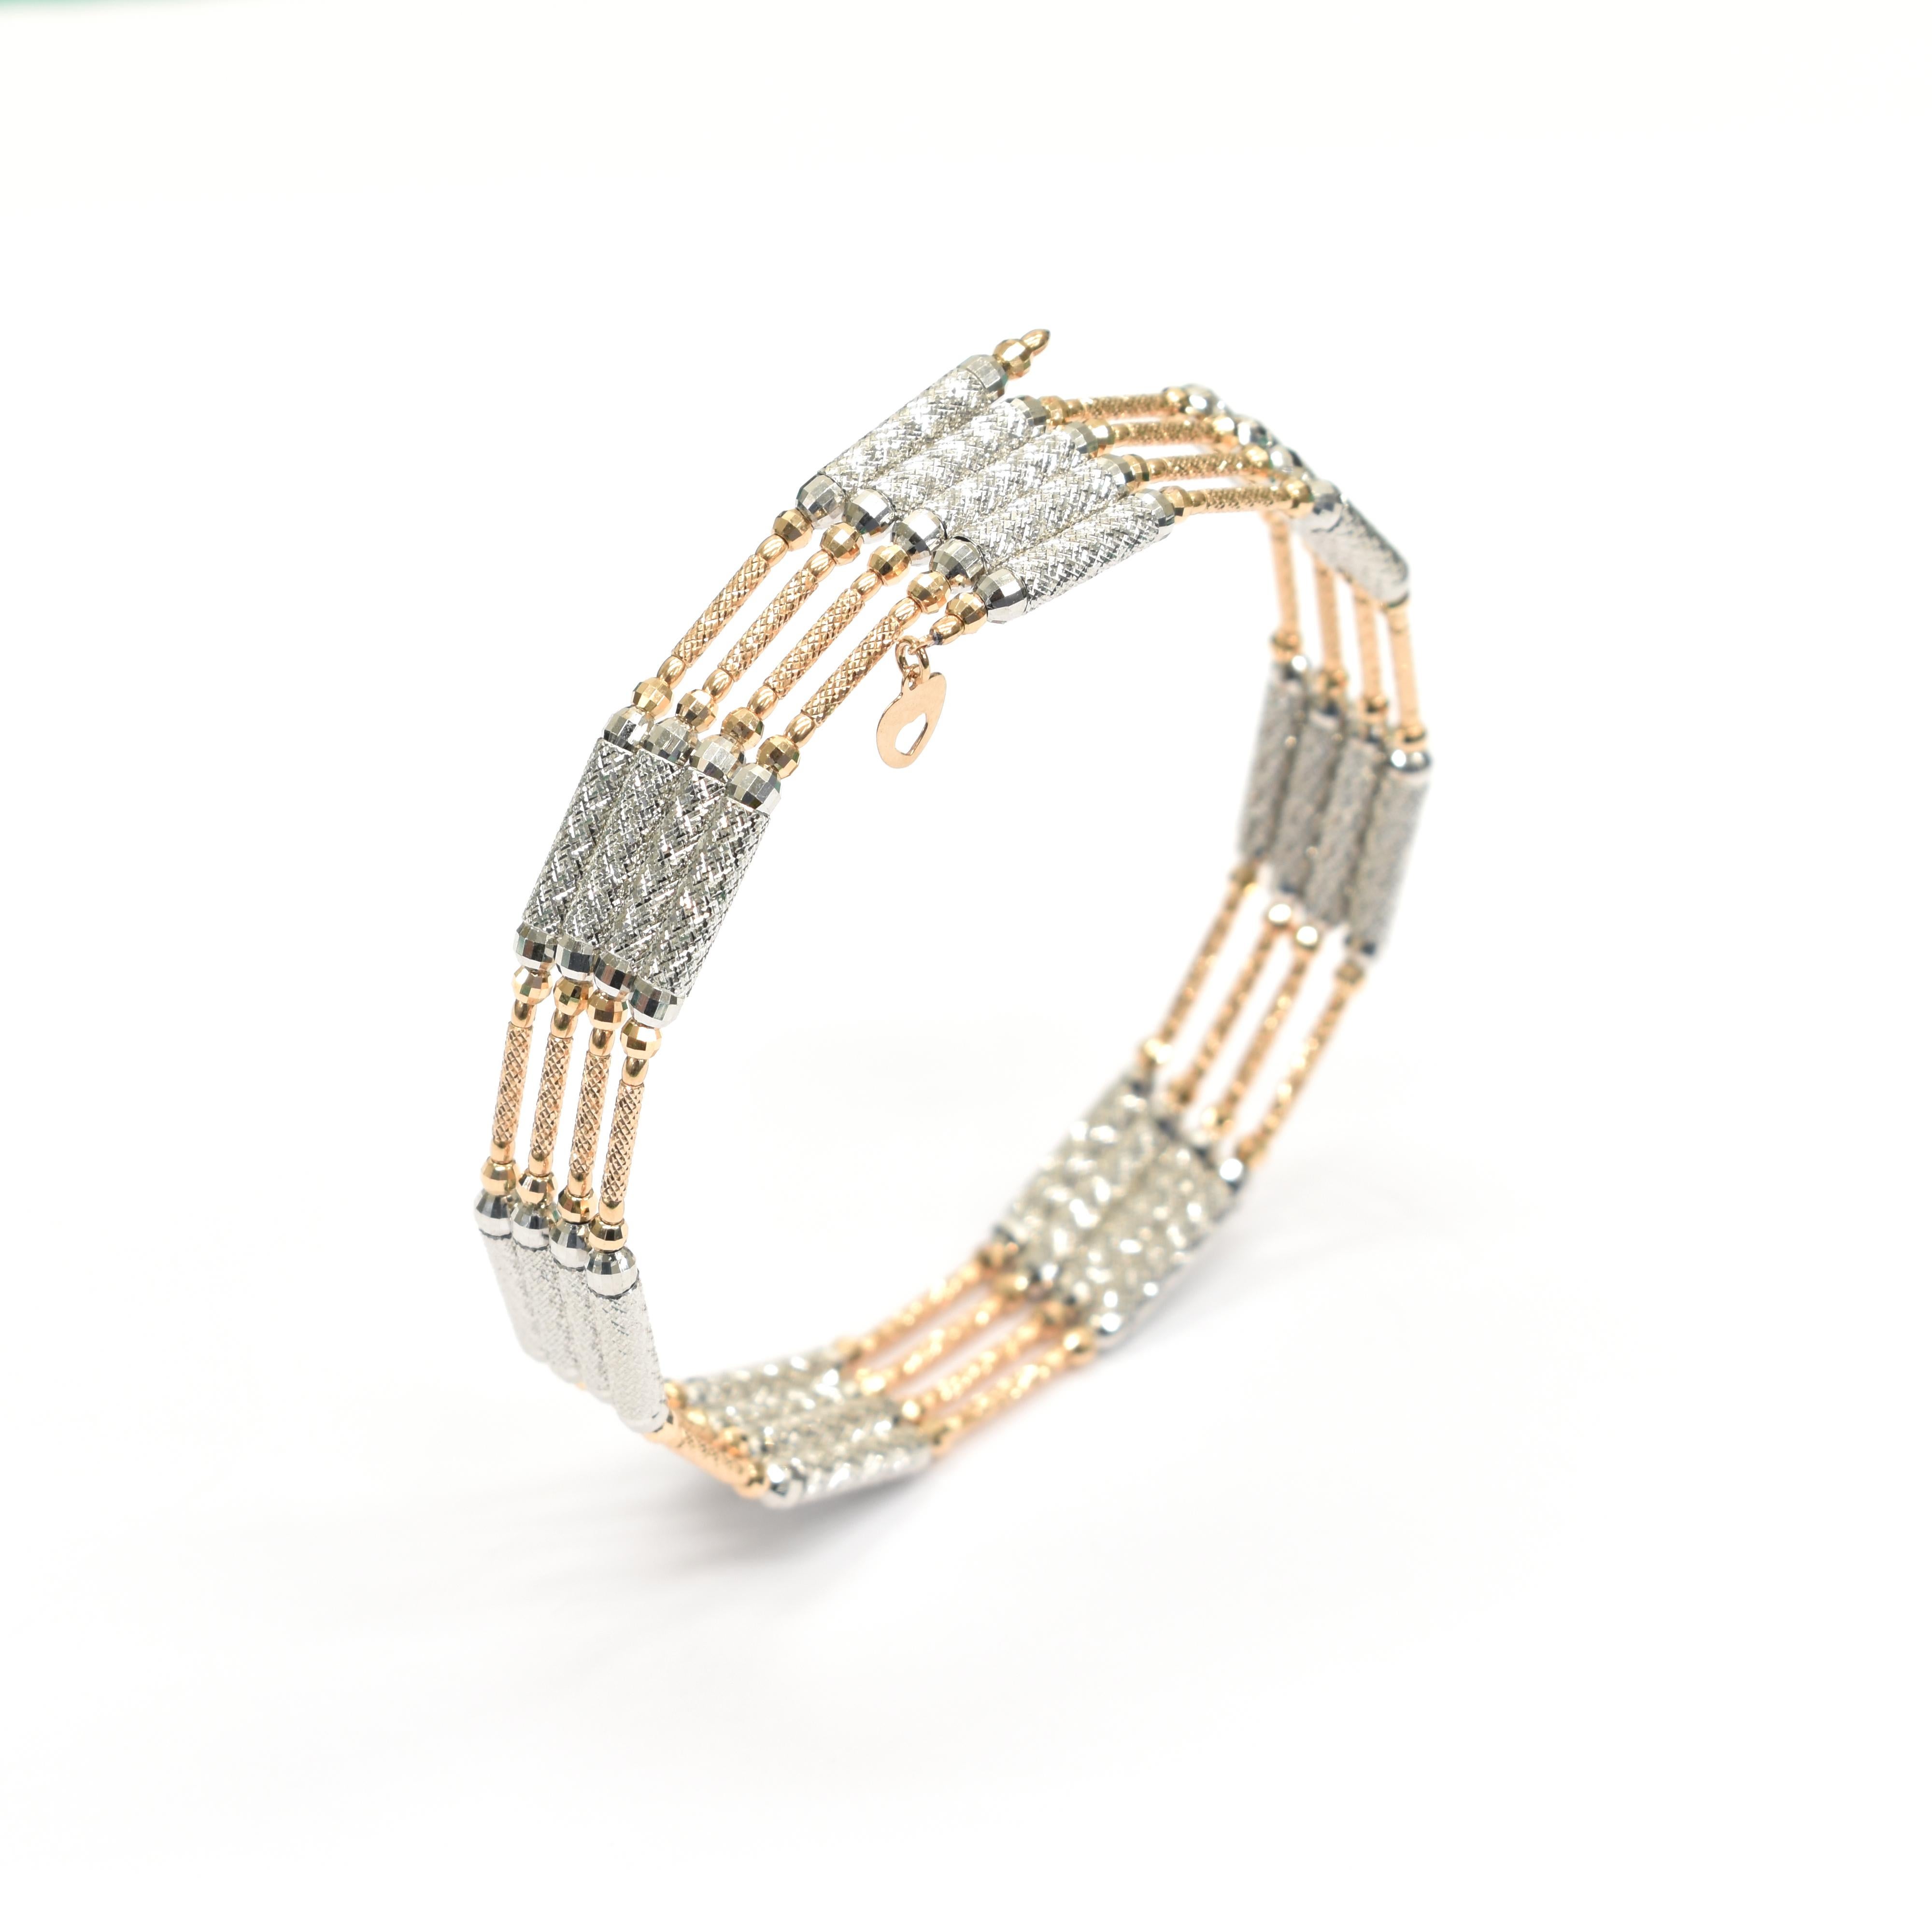 A stunning multi-use Bracelet-Necklace made in a combination of 18 Karat White and Rose Gold with a magnetic mechanism. Approximately 6.5 grams of Gold. Can also be used as an anklet. Made in Japan. Contact us for more information!